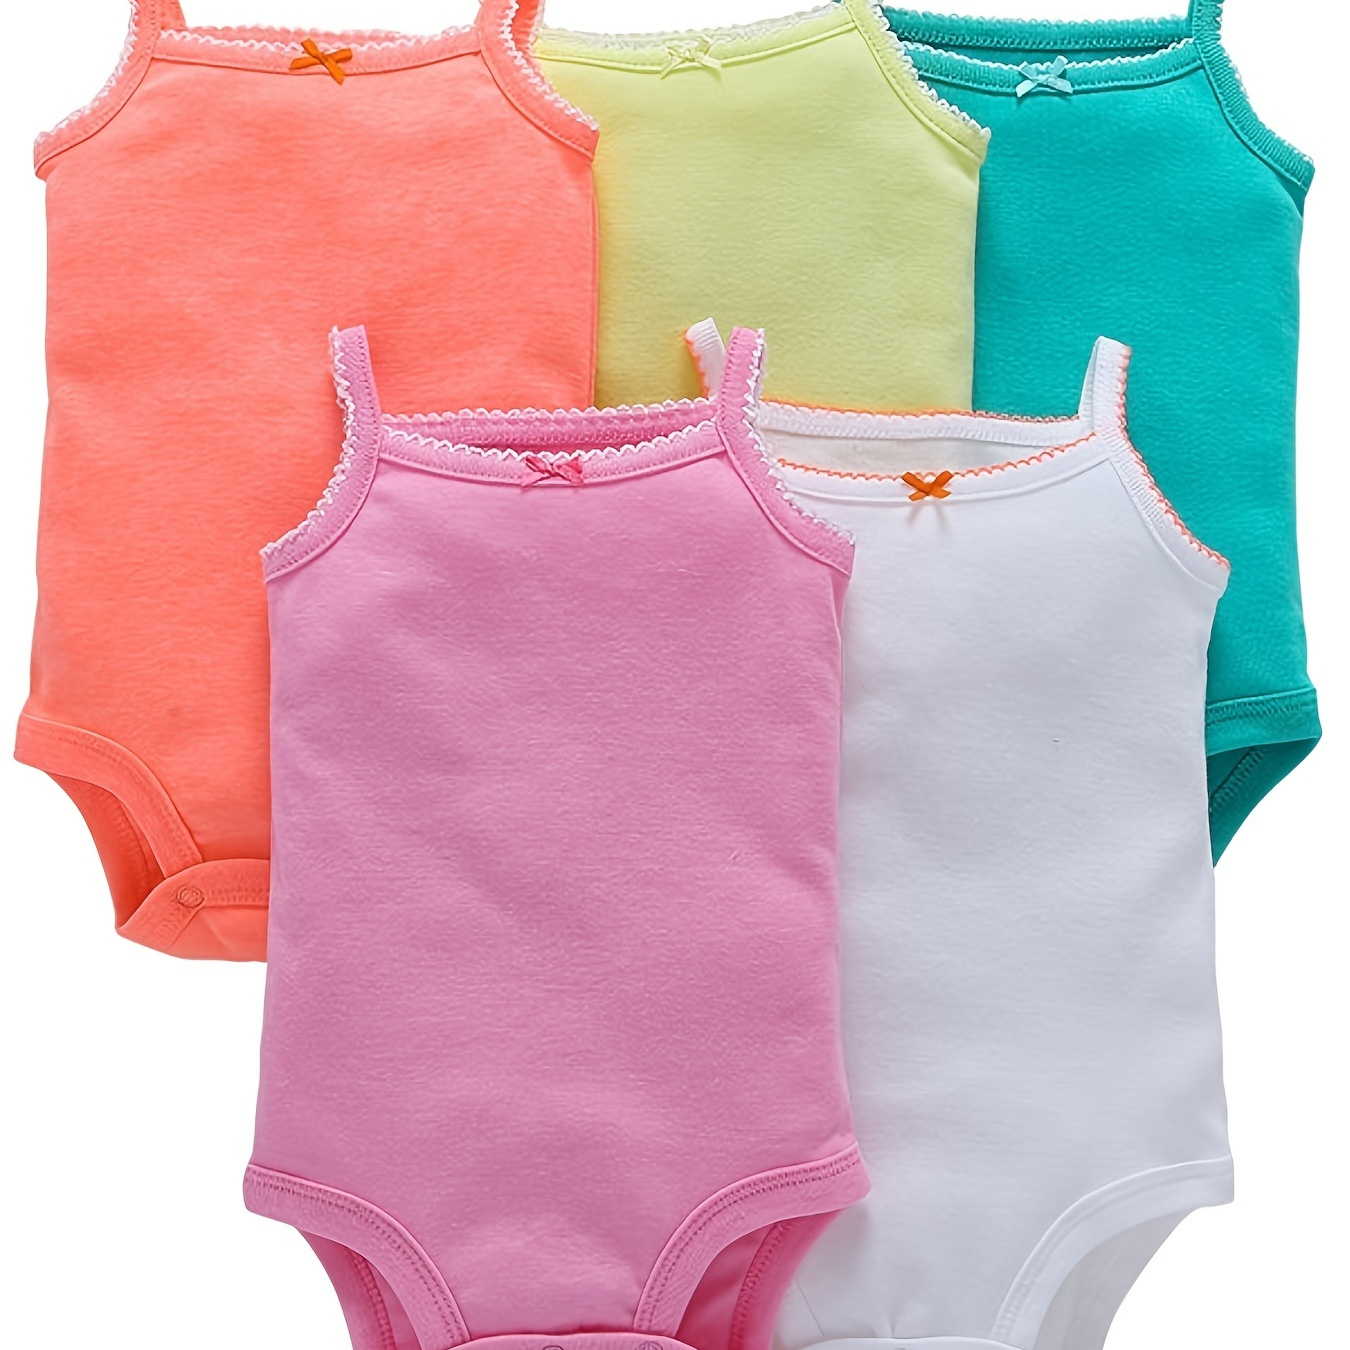 

5pcs Infant Cami Romper Solid Color Cotton Summer Bodysuits For Baby Girls Toddler Clothes